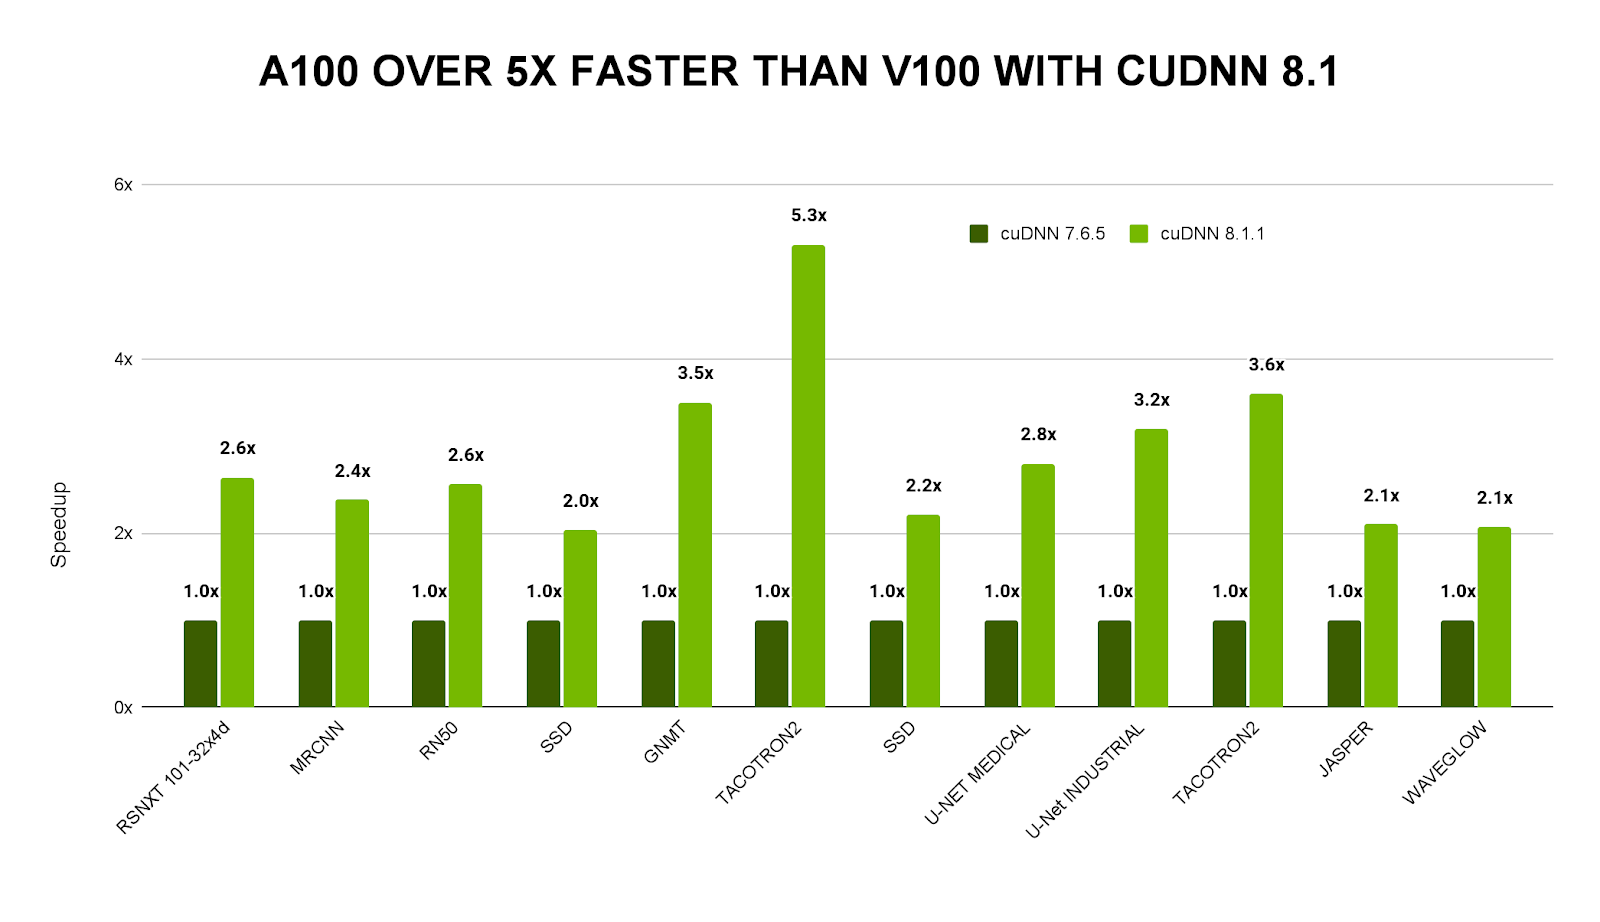 Graph showing the speedup for various deep learning workloads executed with cuDNN 7.6.5 on DGX-1V versus cuDNN 8.1 on DGX-A100 ranges from 2.0x for SSD to 5.3x for TACOTRON2.